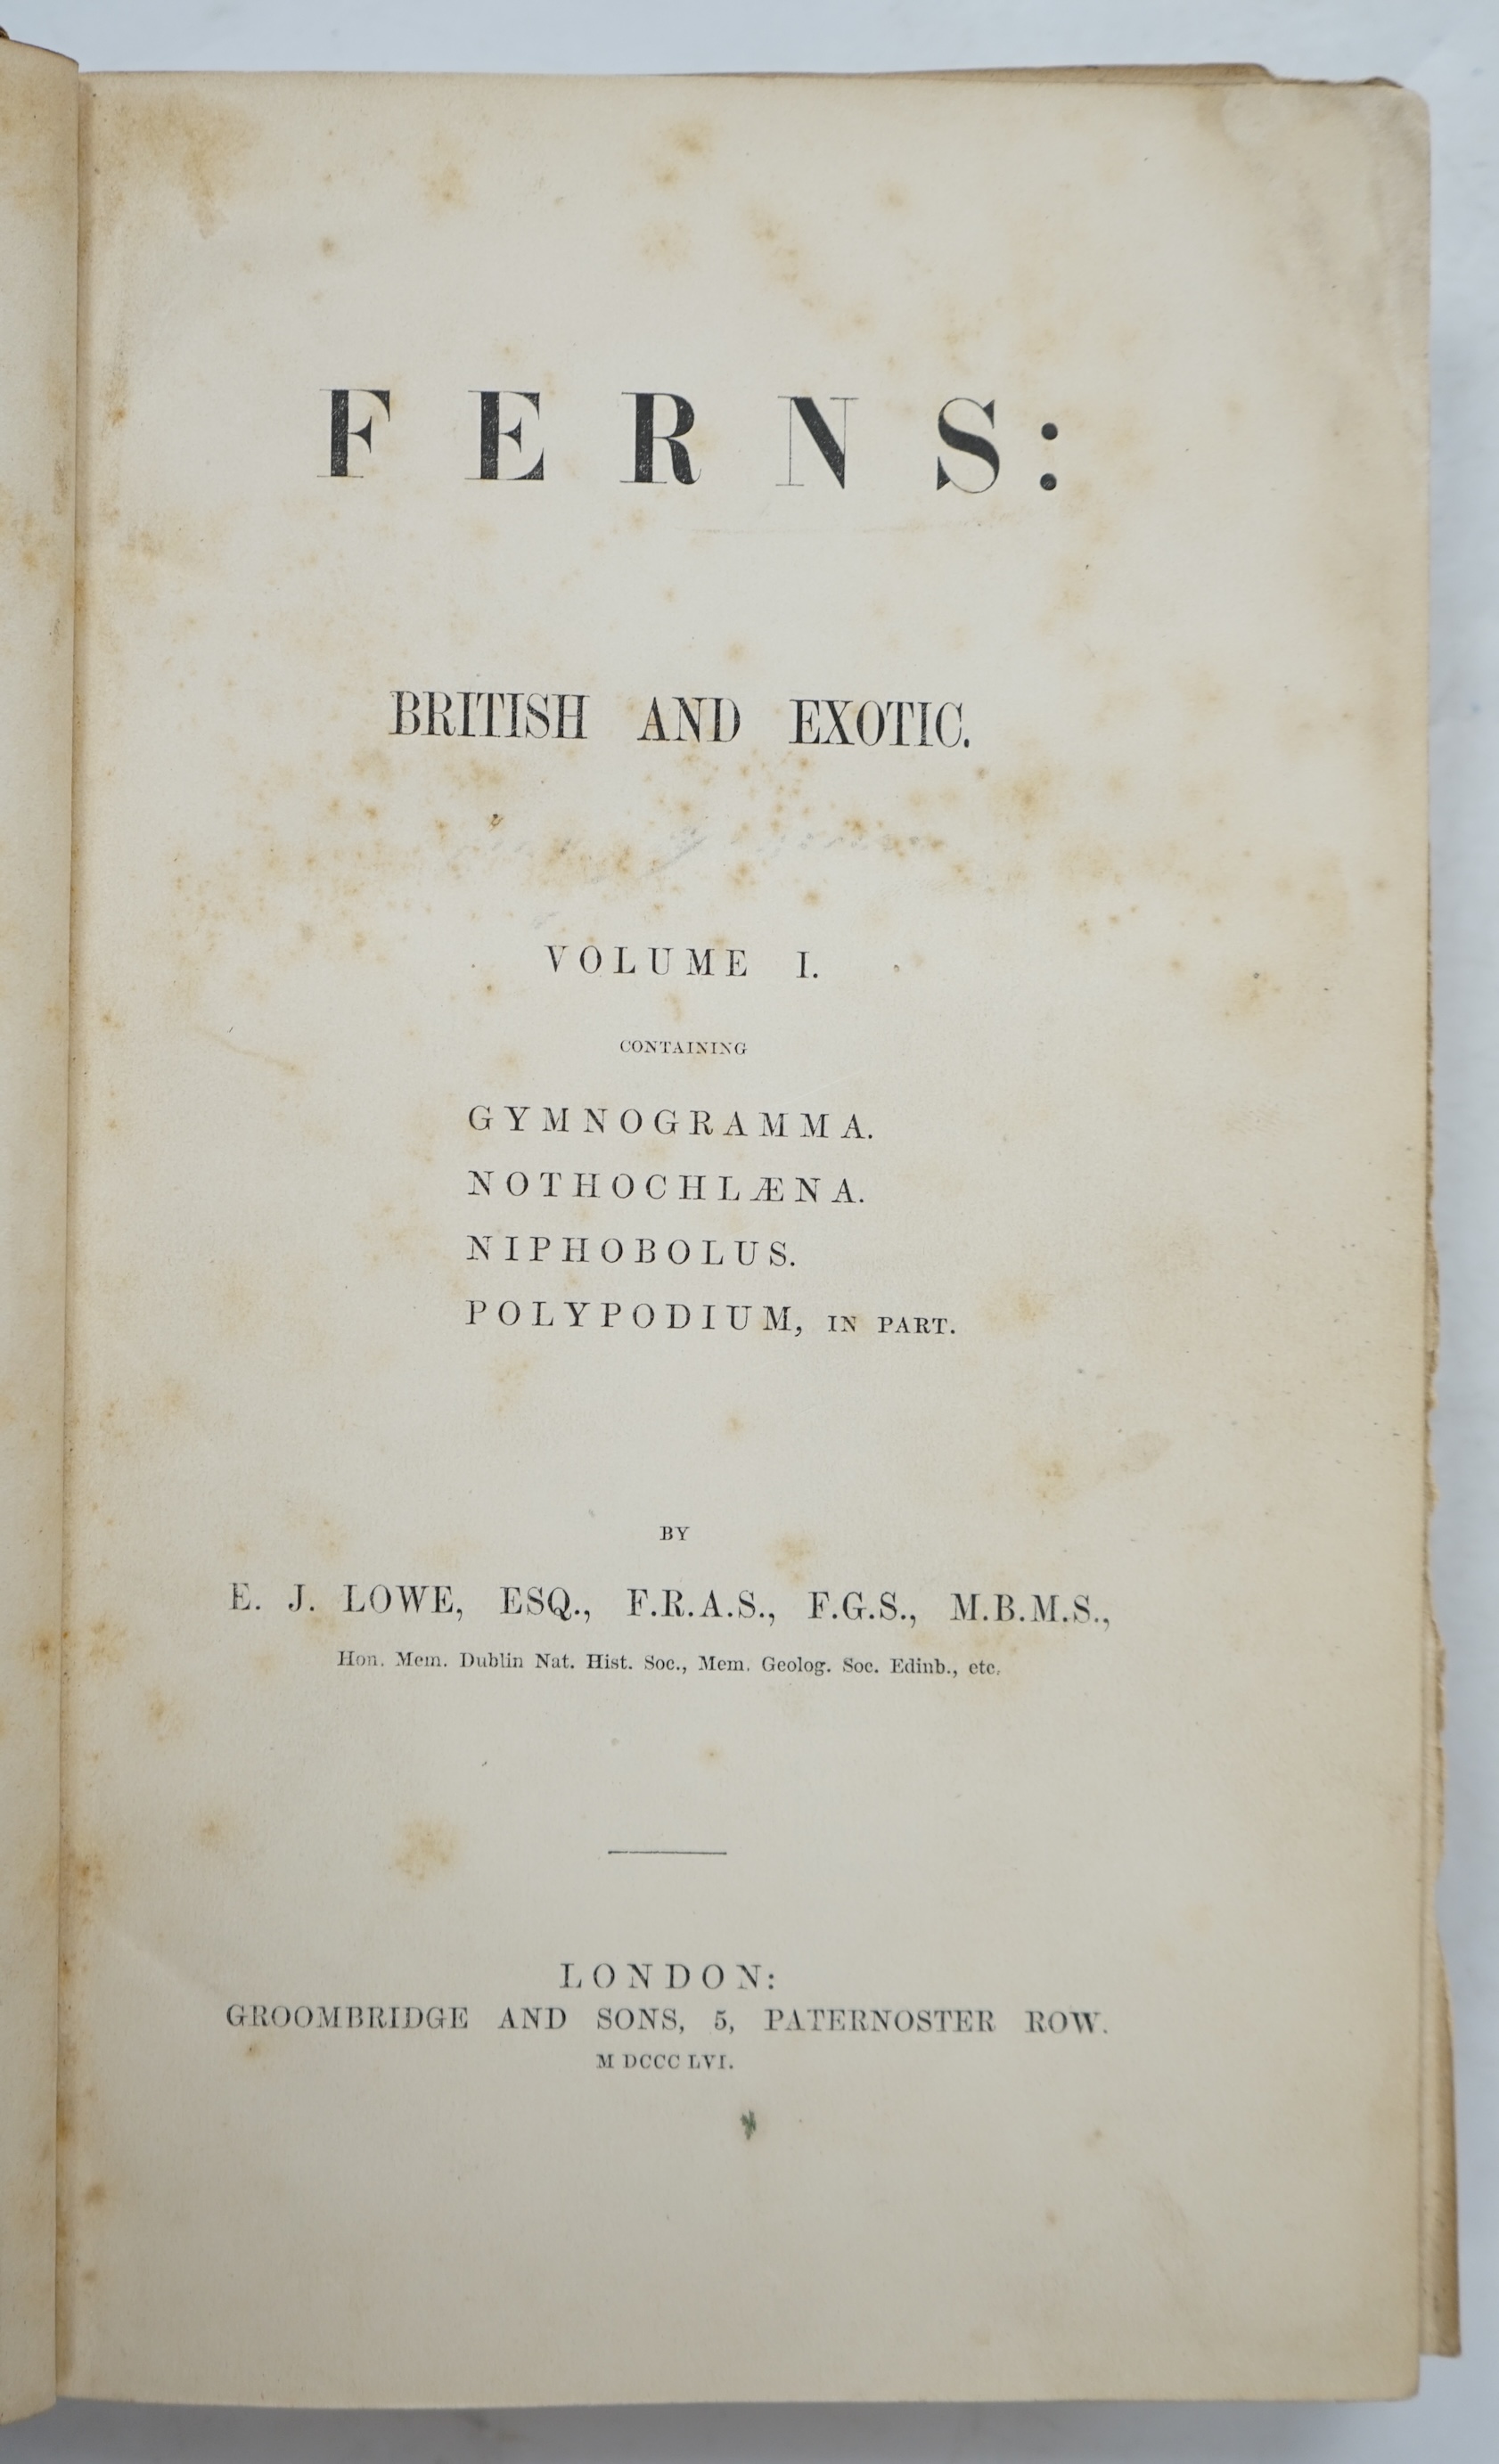 Lowe, Edward Joseph - Ferns: British and Exotic, 8 volumes, 1st edition, 8vo, half calf, scuffed and with some loss to the leather, 479 chromolithograph plates, Groombridge and Sons, London, 1856-60.